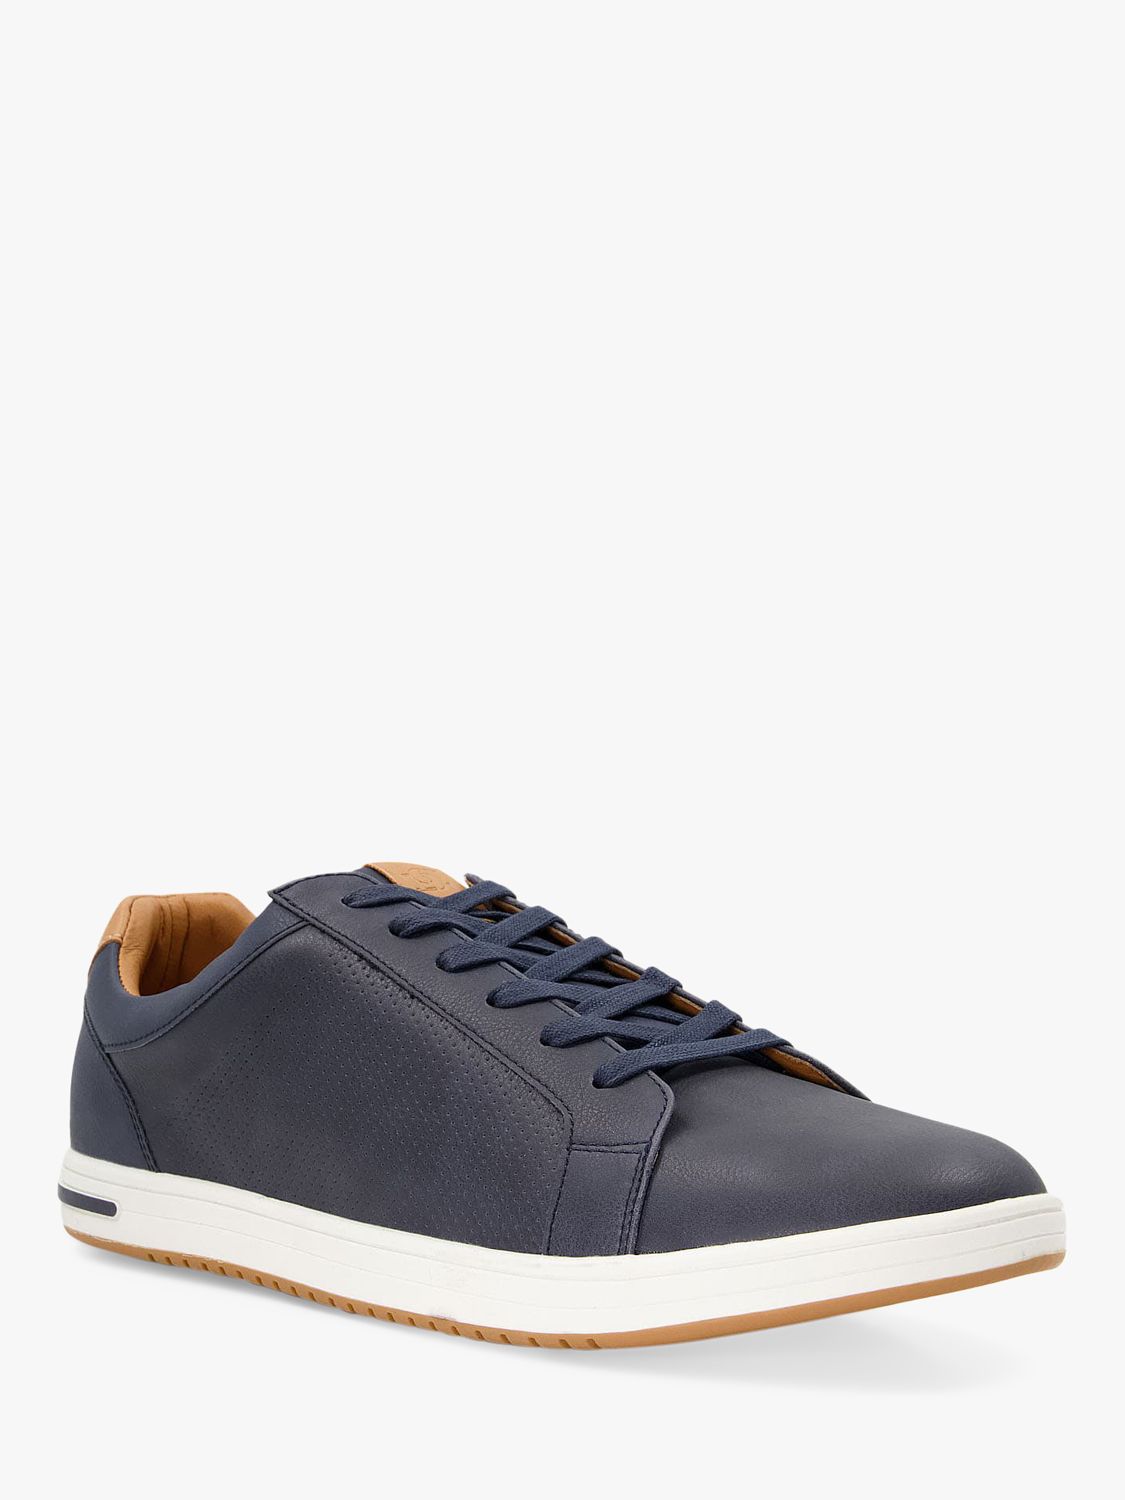 Dune Tezzy Synthetic Shoes, Navy, 6